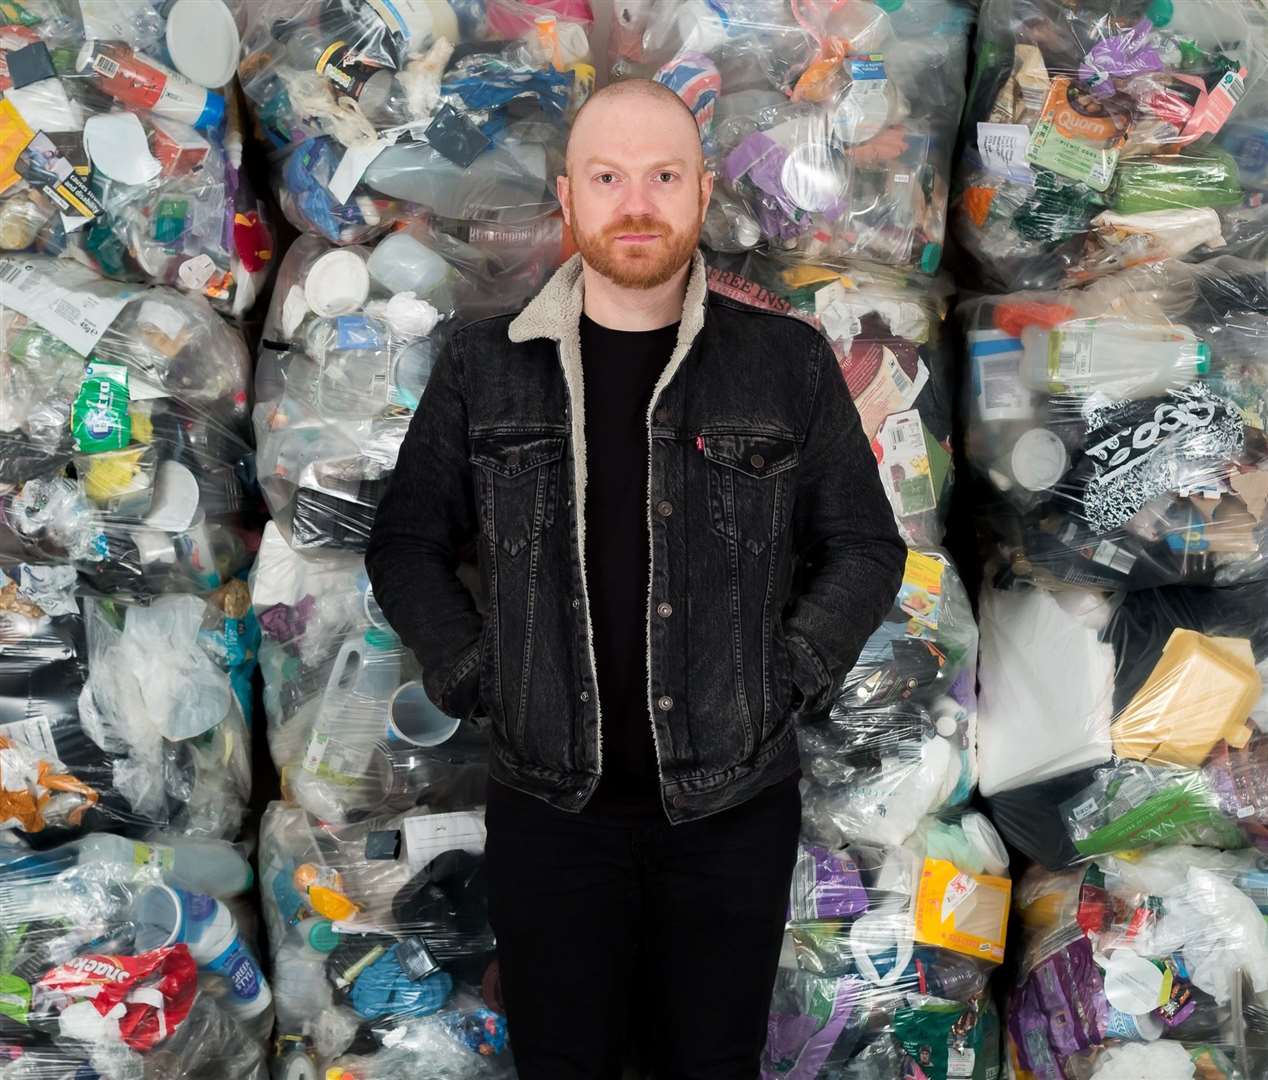 Daniel has been on a journey to reduce plastic waste for the last few years. Photo by Ollie Harrop